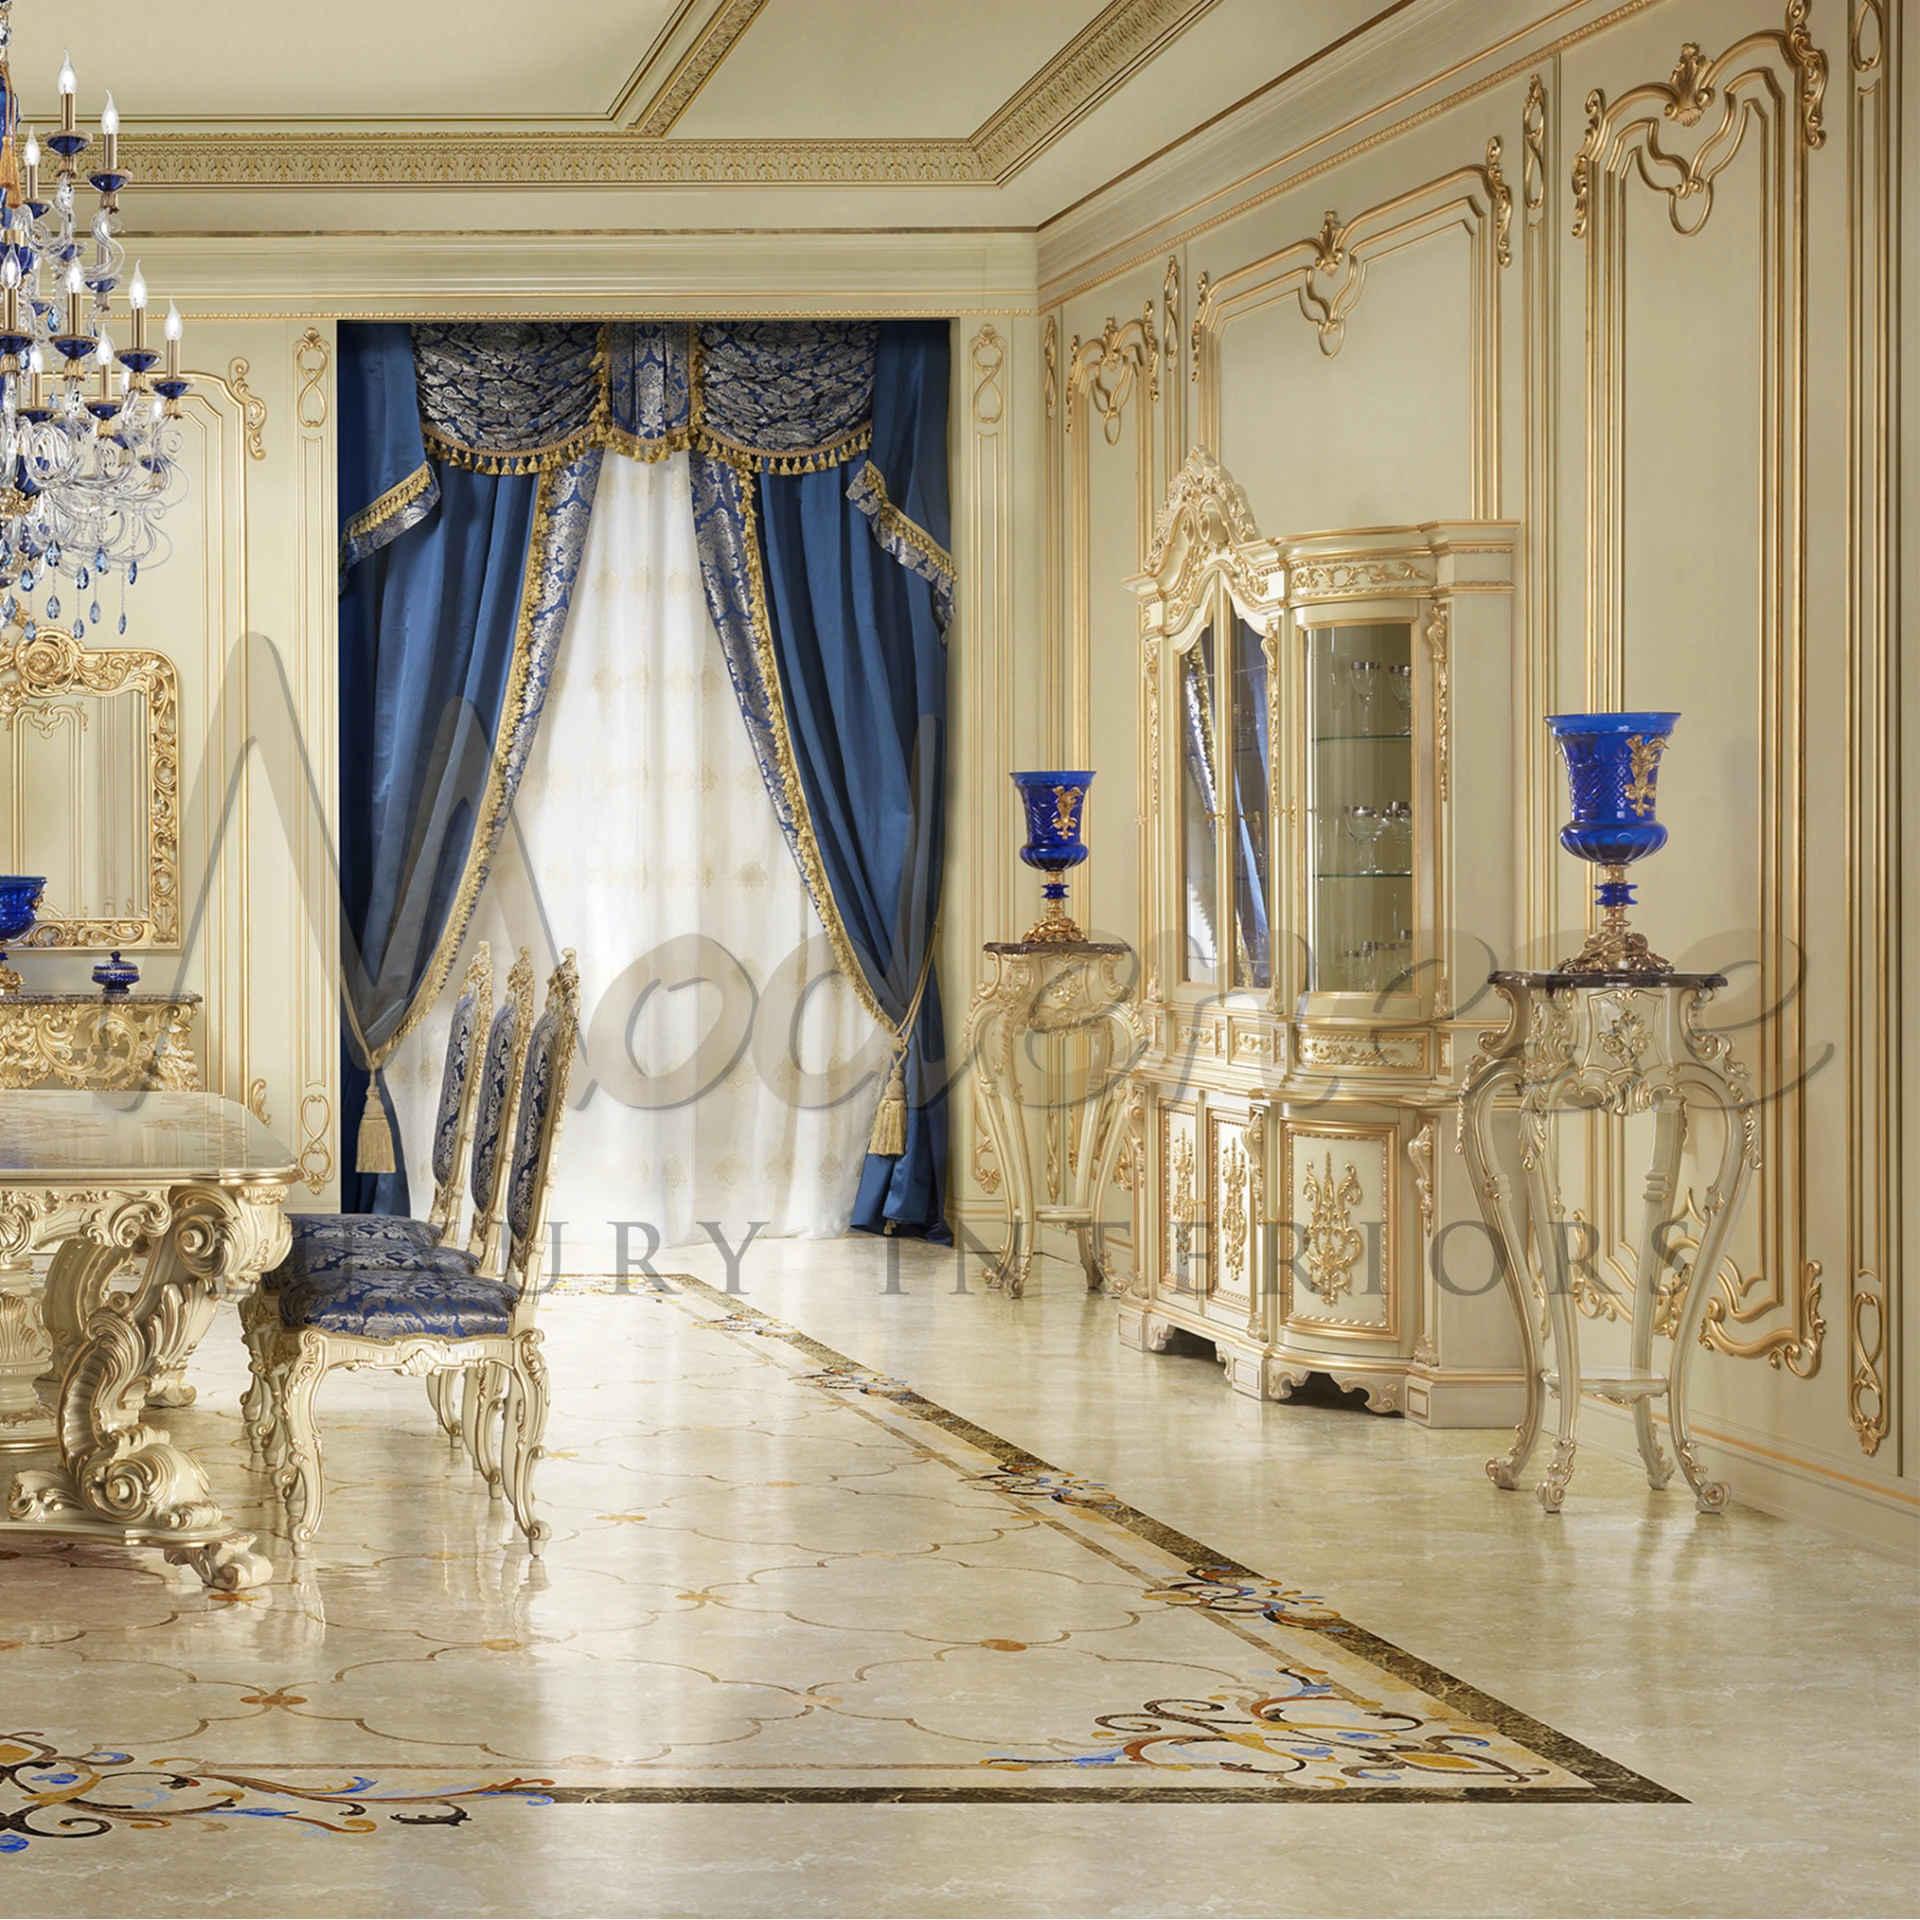 Luxurious living space featuring a decorative cabinet, stylish chairs, and blue and white curtains